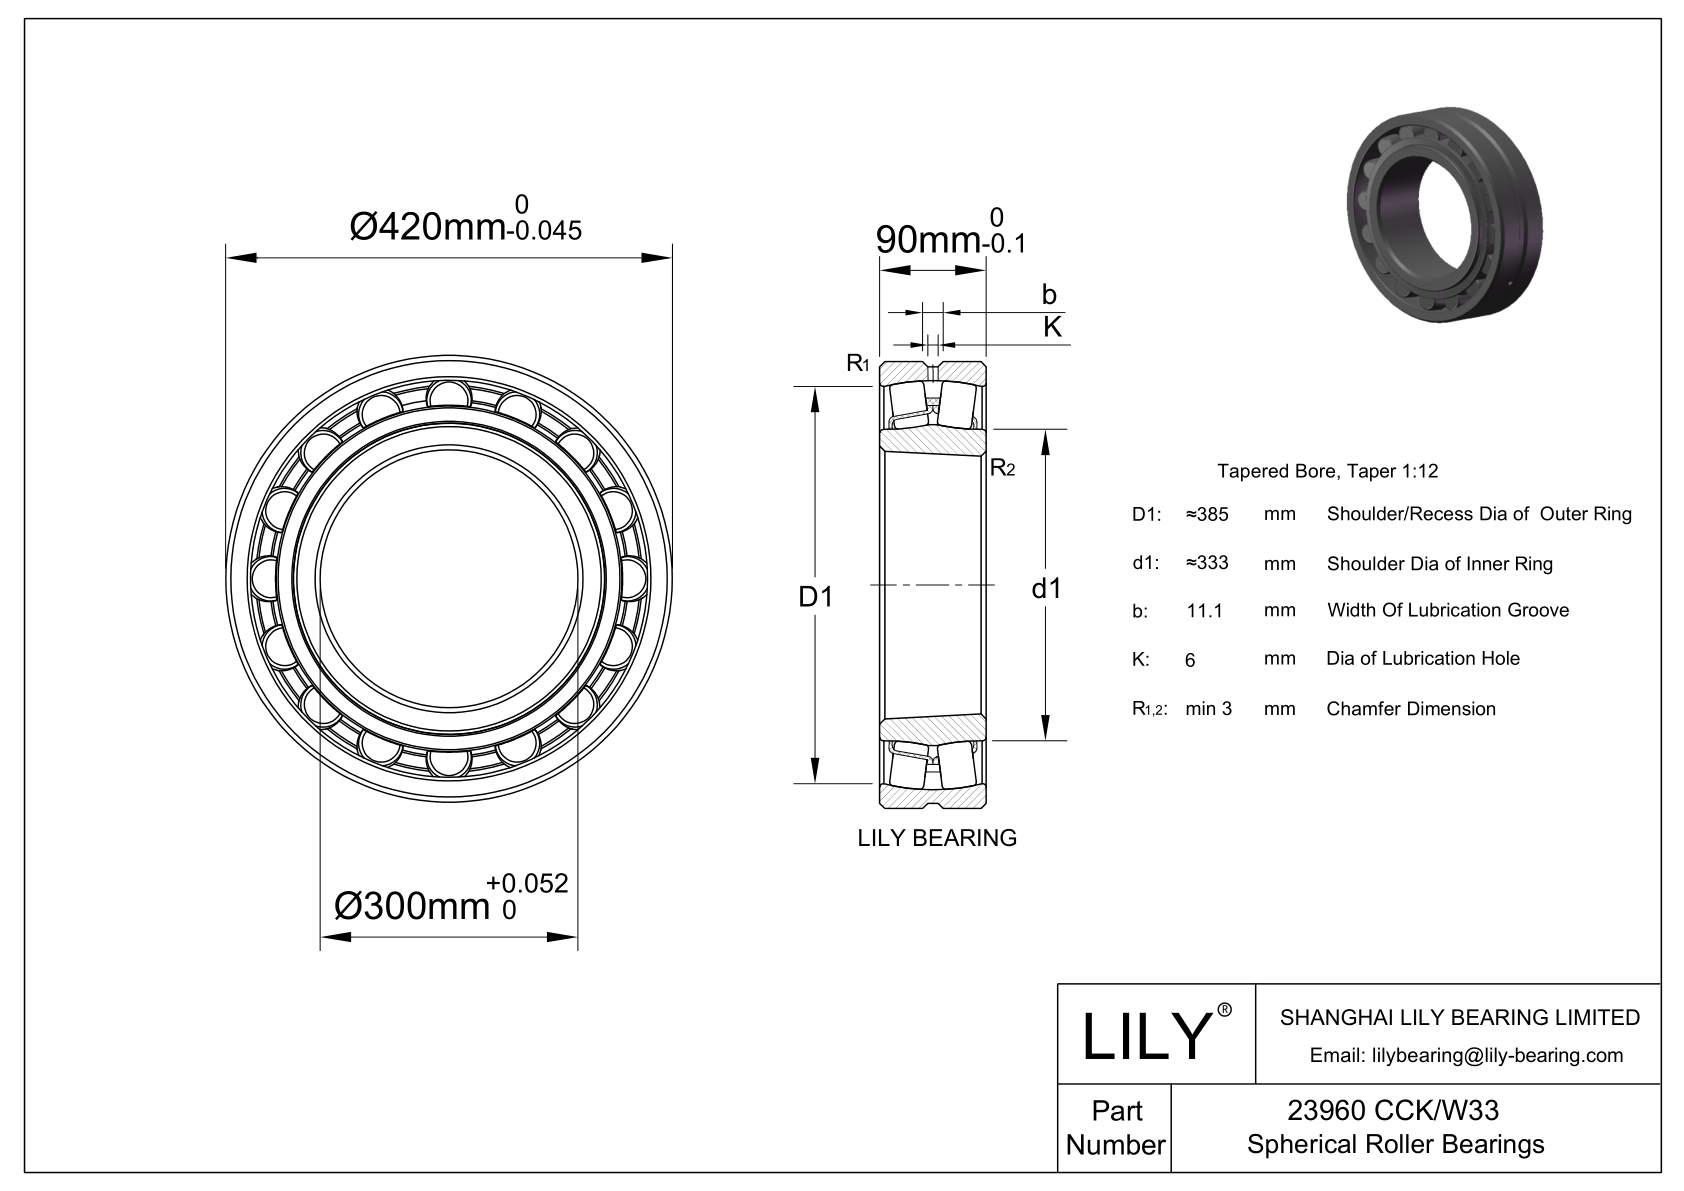 23960 CCK/W33 Double Row Spherical Roller Bearing cad drawing